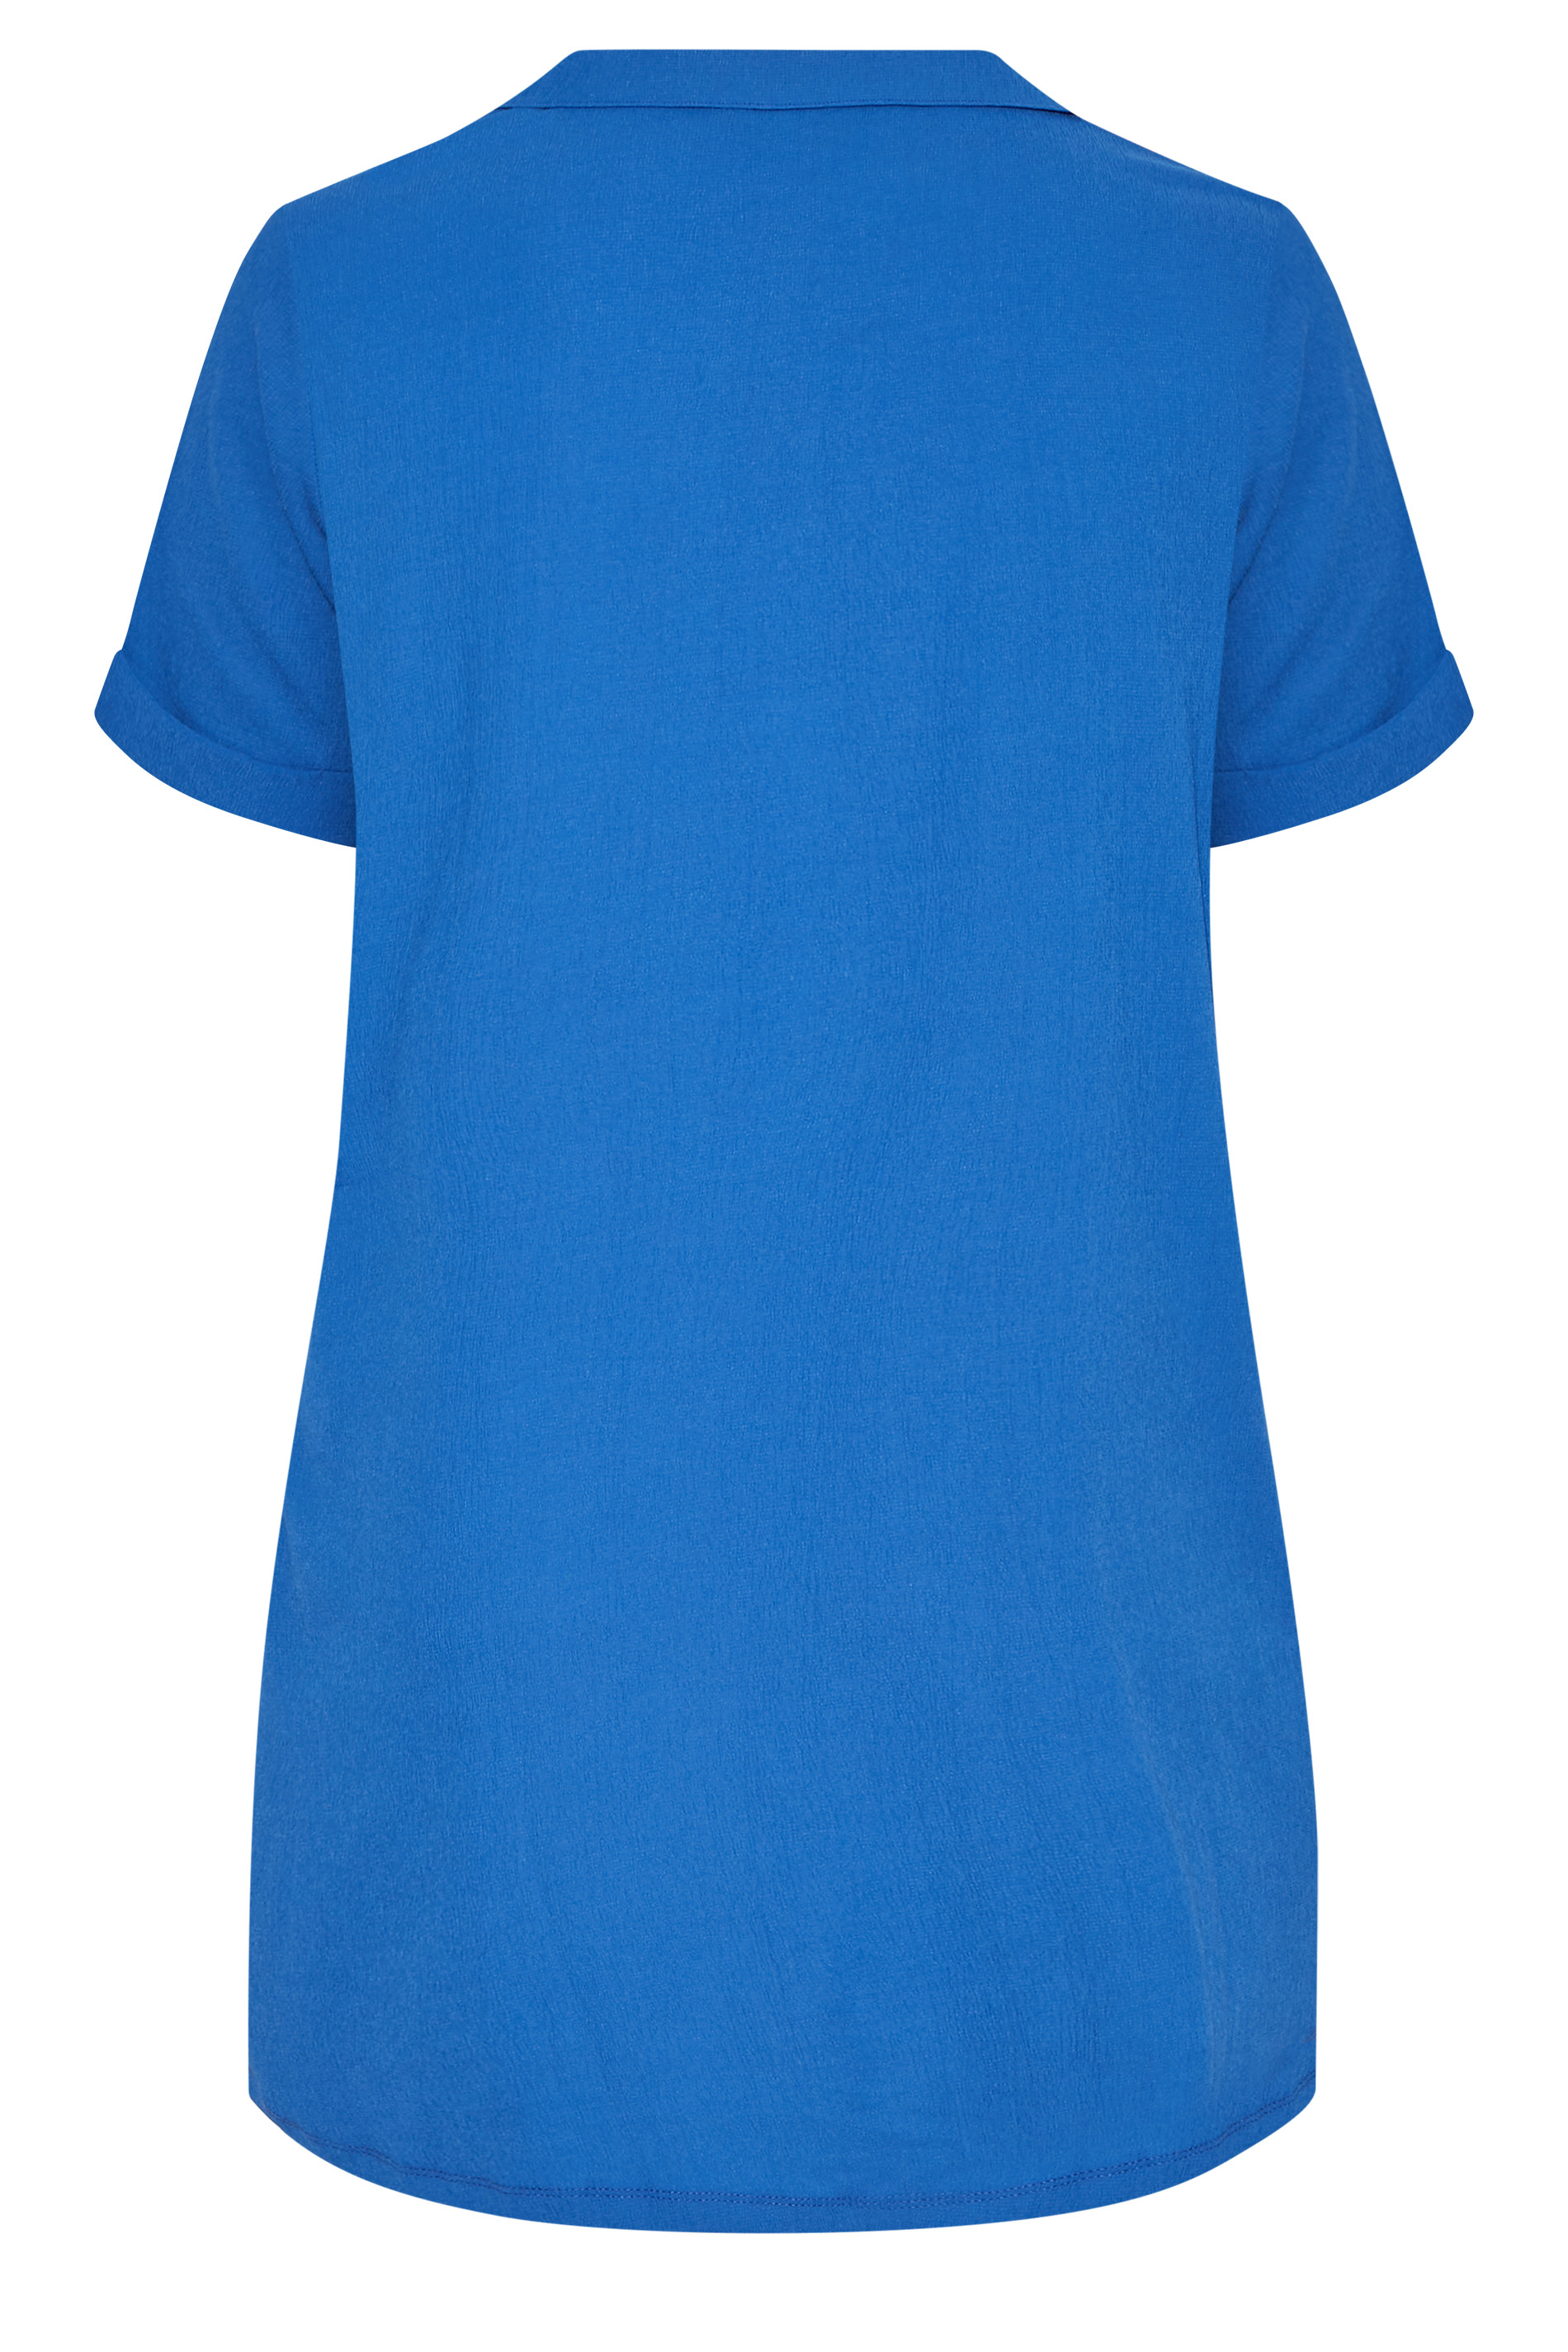 Grande taille  Tops Grande taille  Blouses & Chemisiers | Curve Cobalt Blue Crinkle Button Through Shirt - RD33613